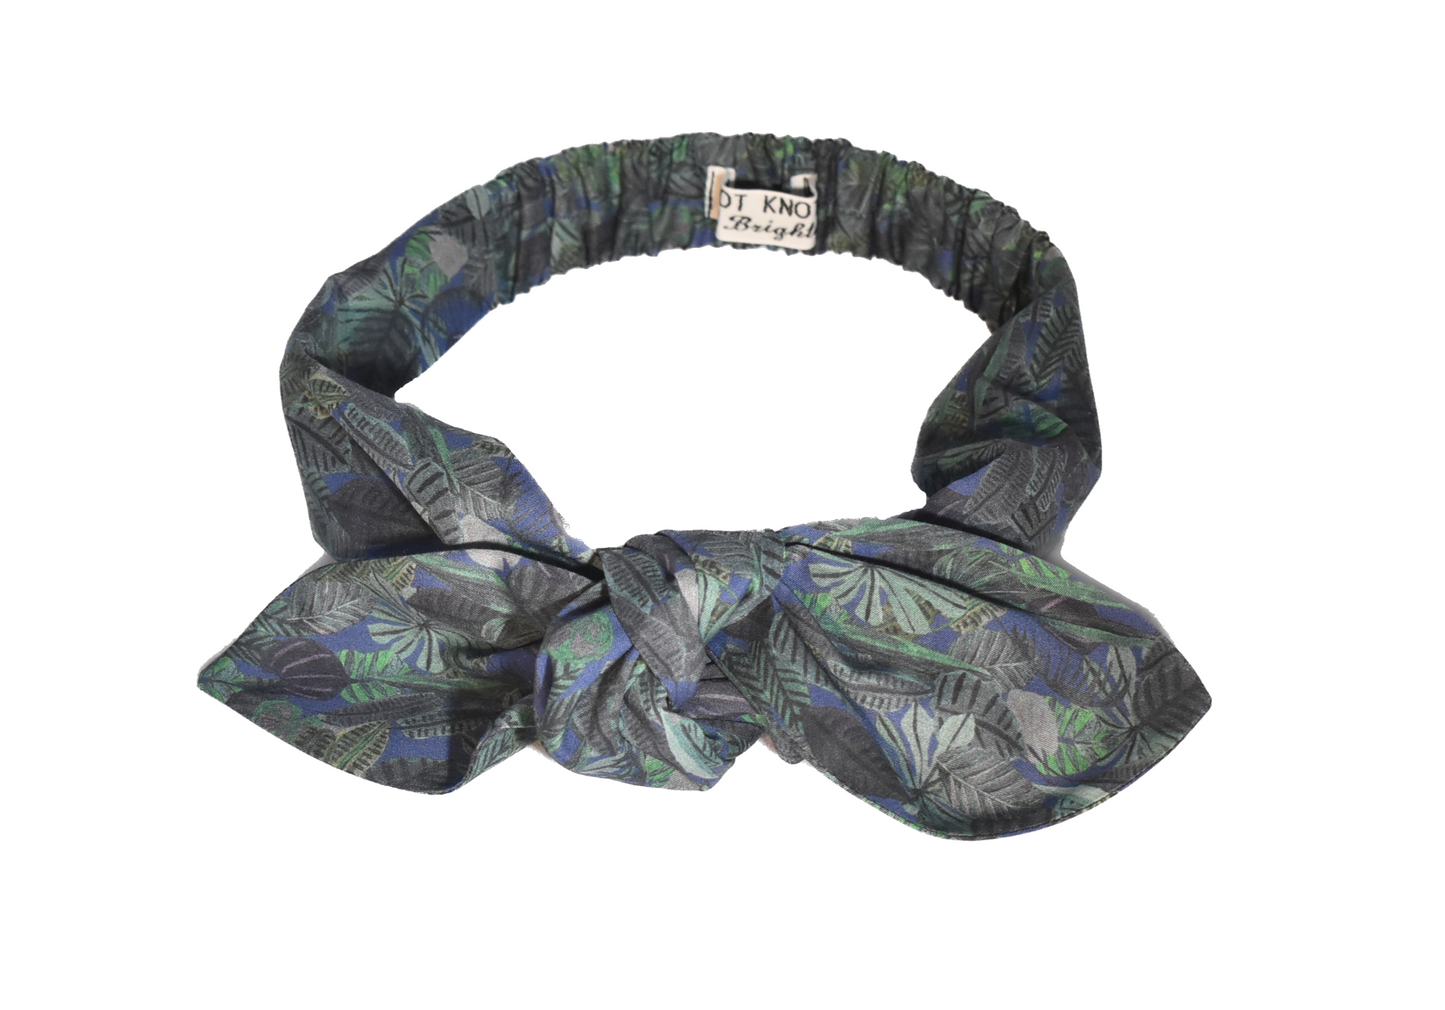 Kids Tot Knot Twisted hairband - Liberty of London Chaparrel - Navy and Green Fern Print